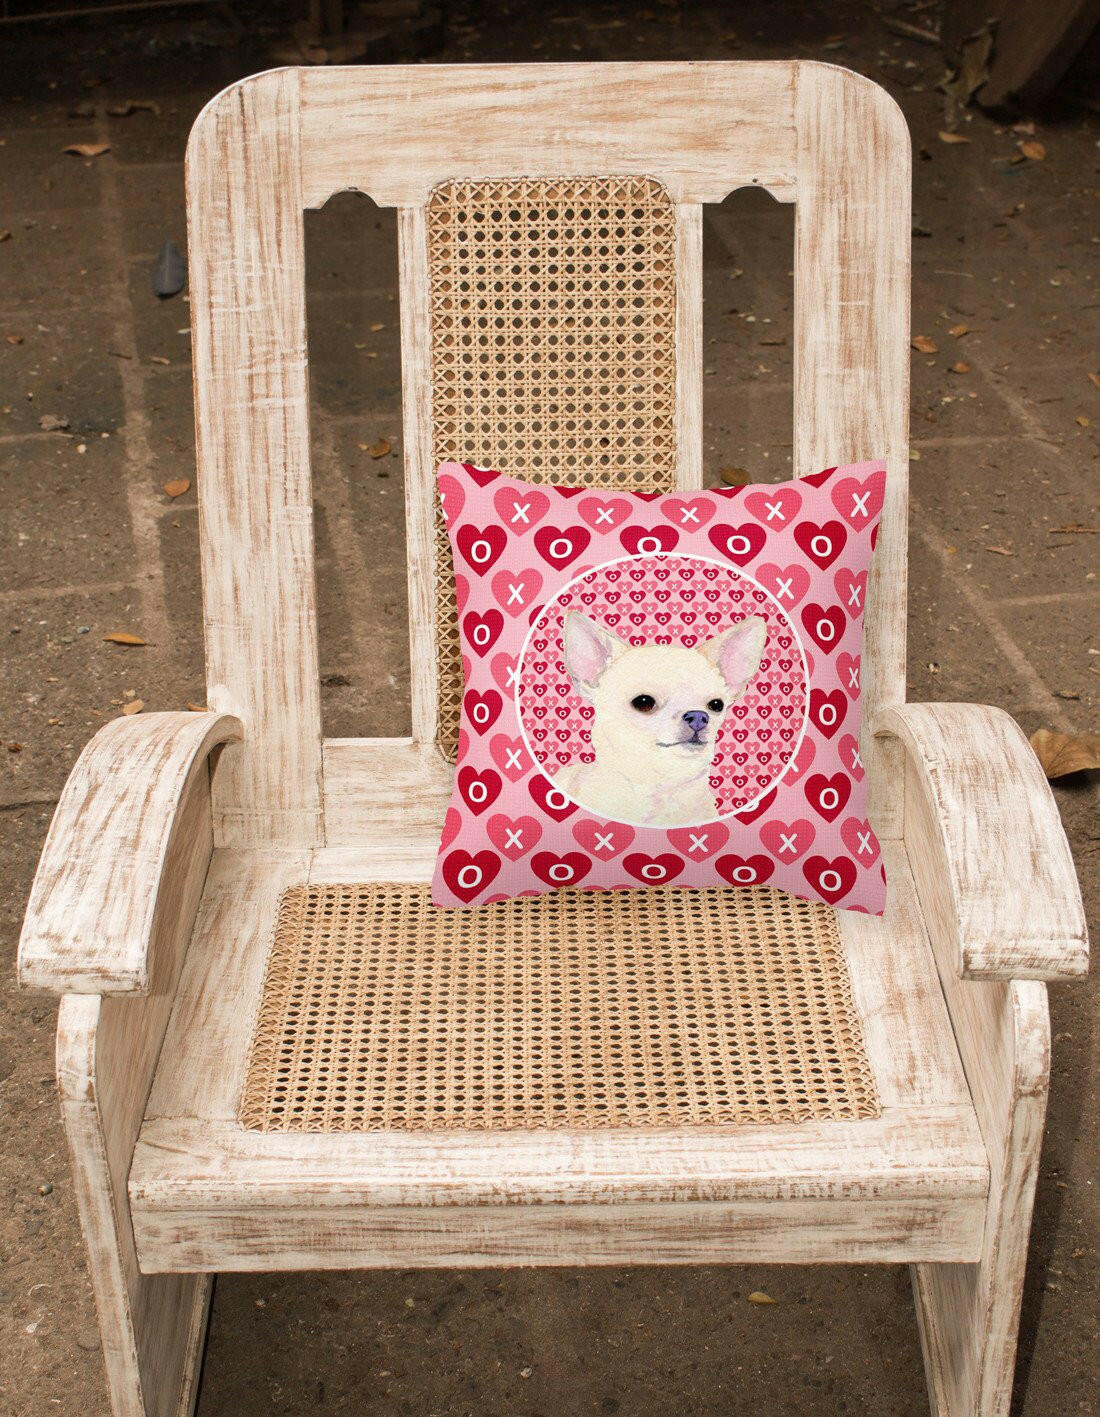 Chihuahua Hearts Love and Valentine's Day Portrait Fabric Decorative Pillow SS4472PW1414 by Caroline's Treasures